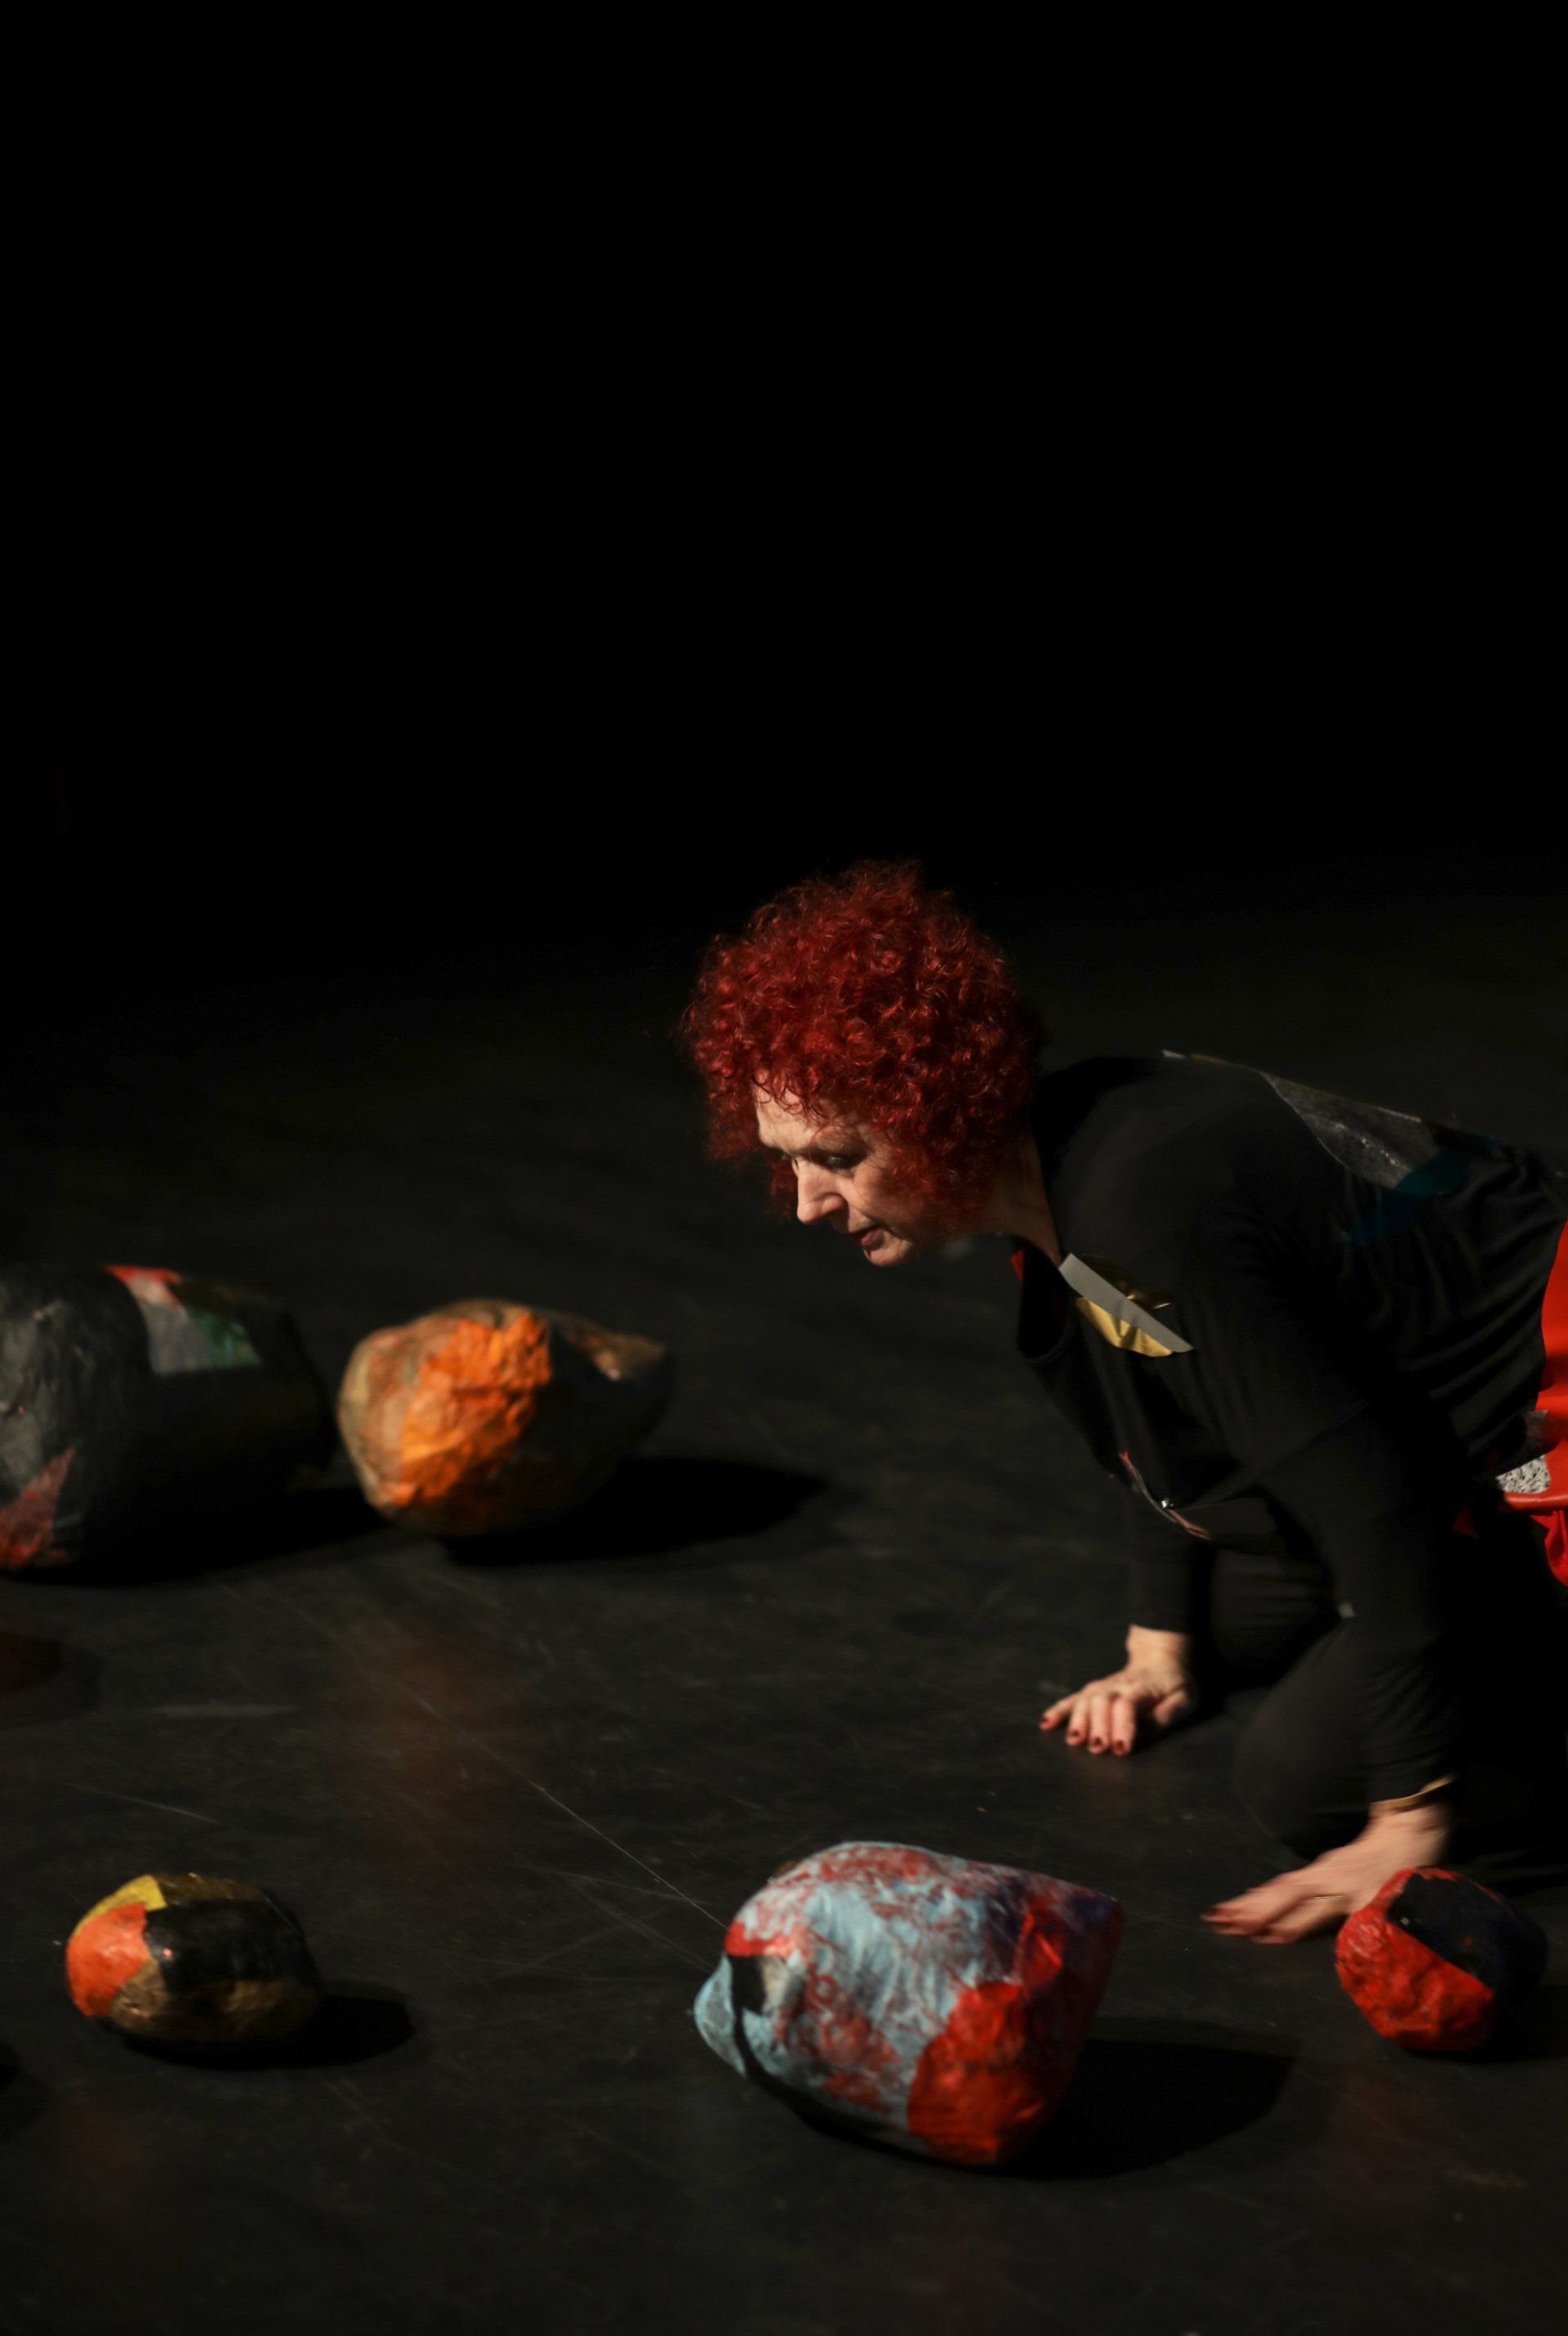 a woman with red hair is crawling on the floor next to a pile of rocks .